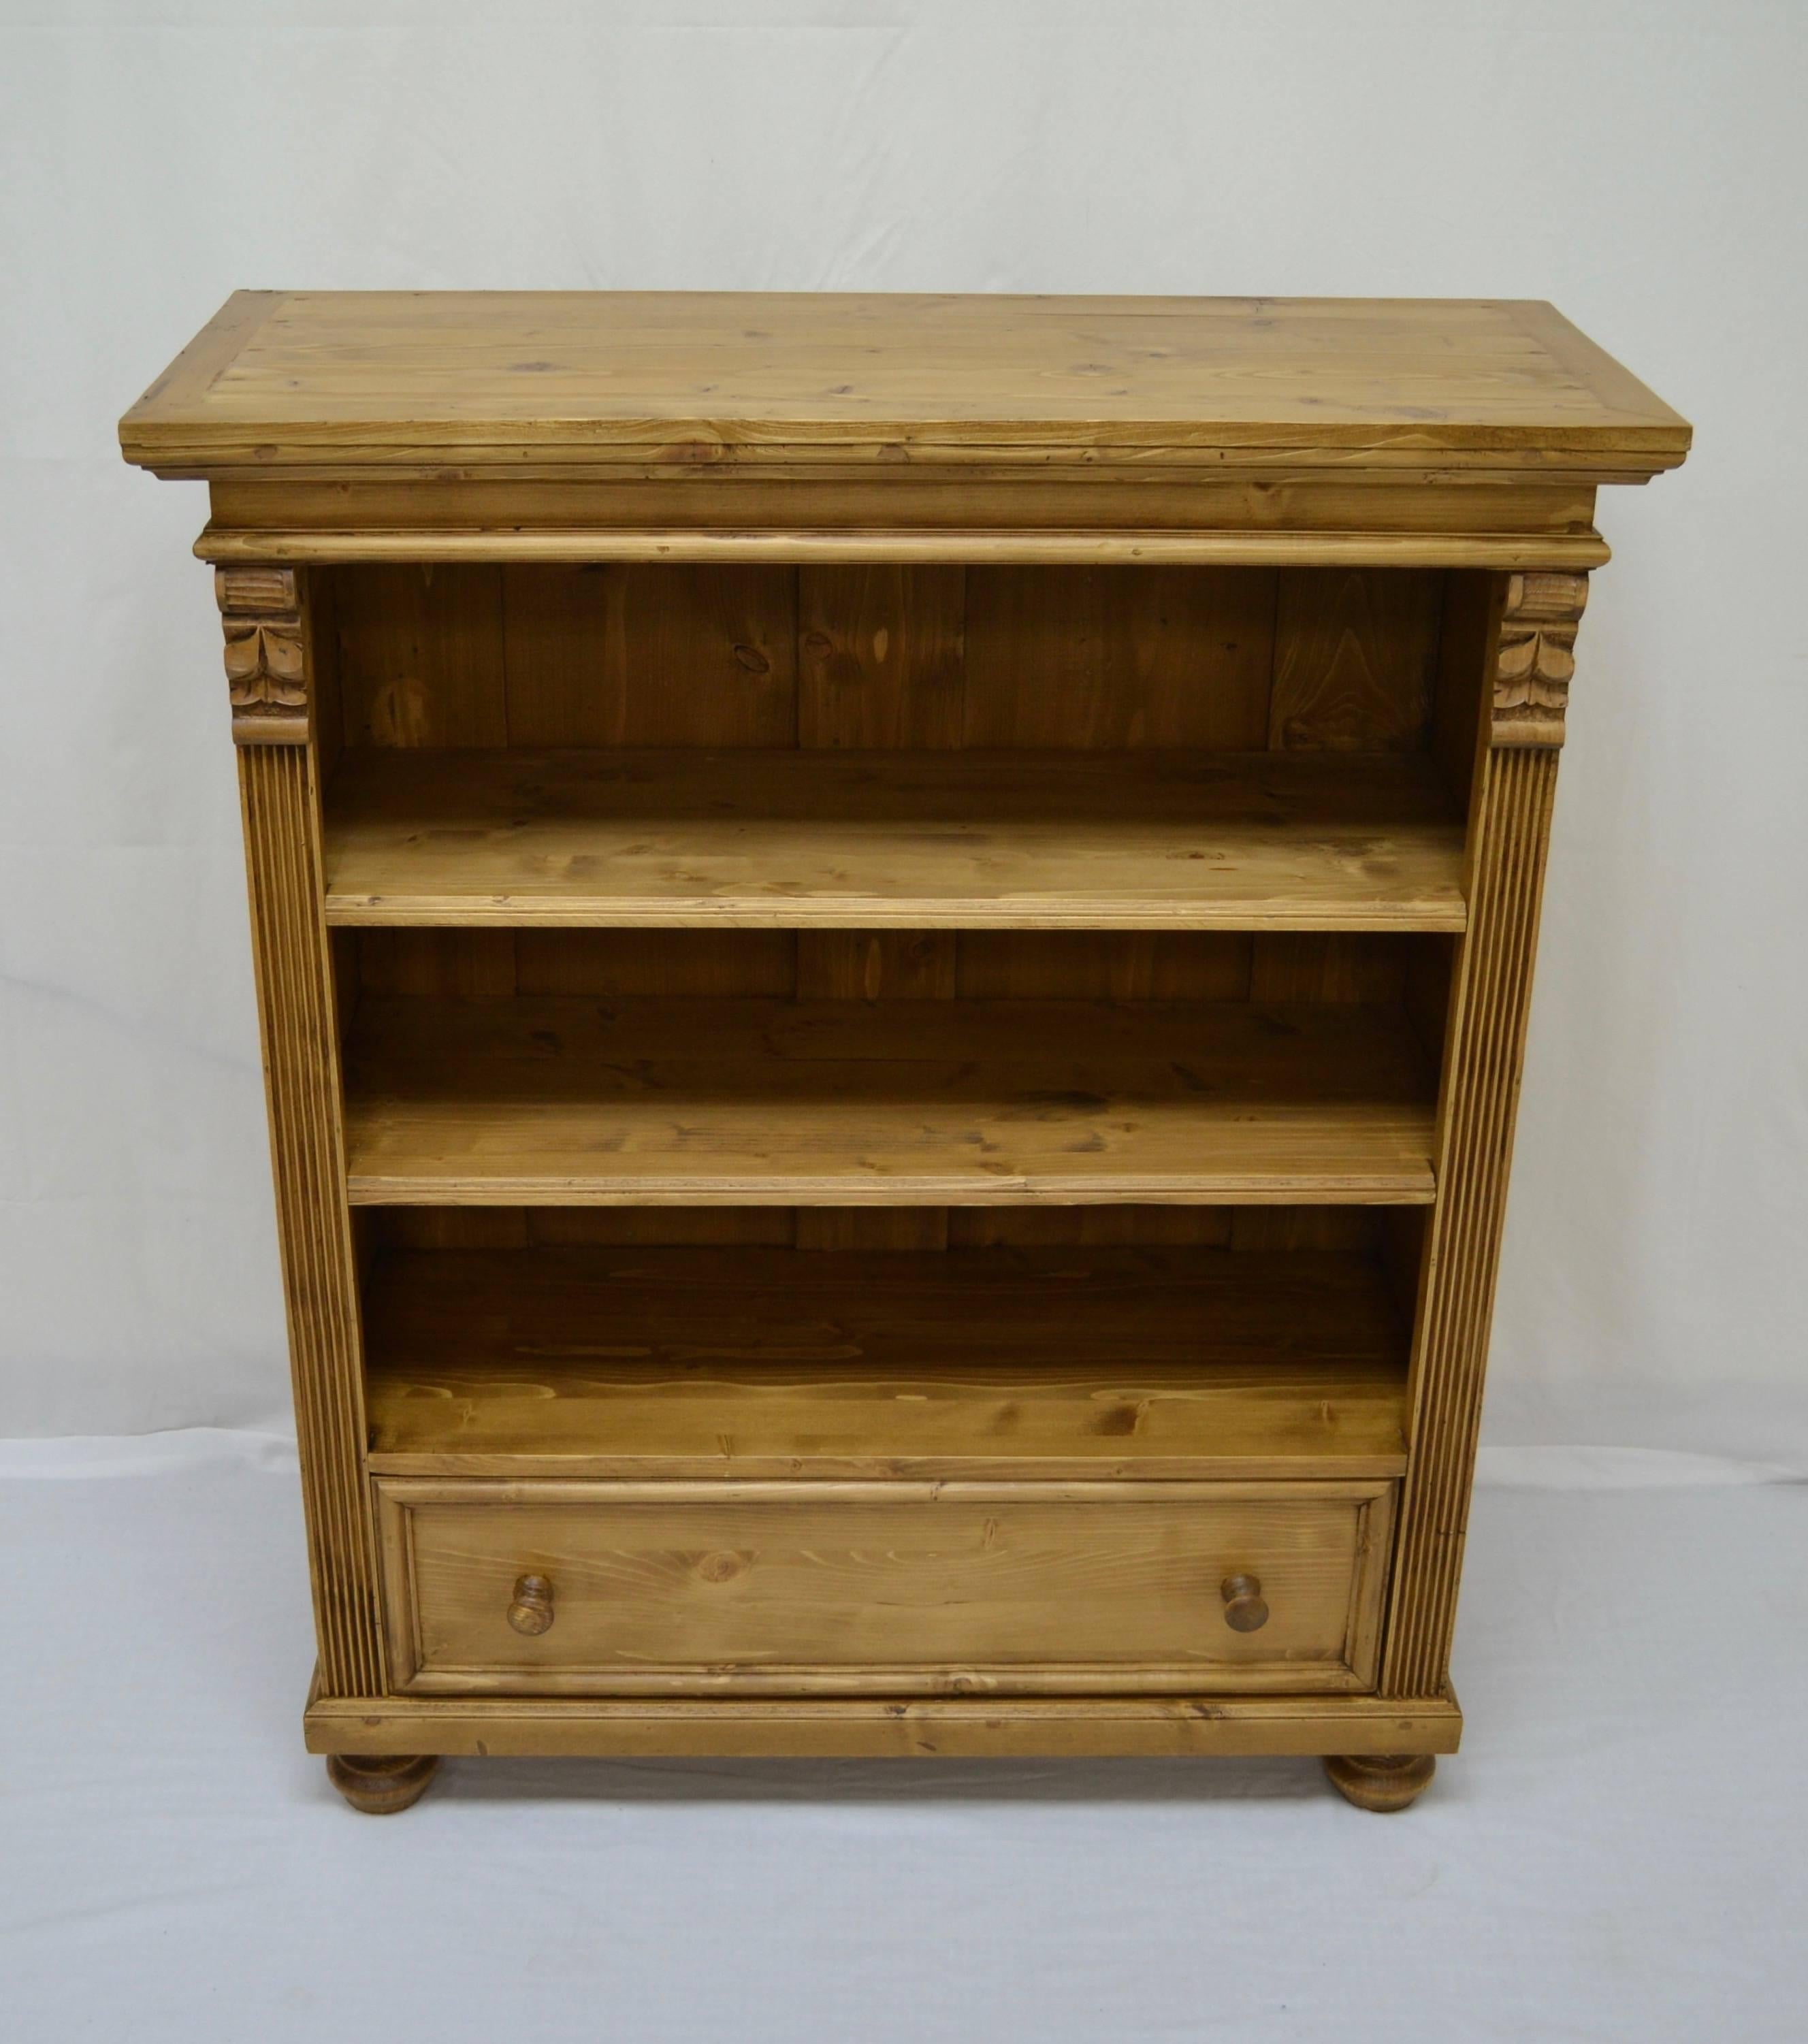 Antique pine bookcases can be hard to find and so can well-made reproductions. Using design features and methods of construction taken from our antique pine furniture, our workshop in Europe takes lightly-used reclaimed pine and fashions our